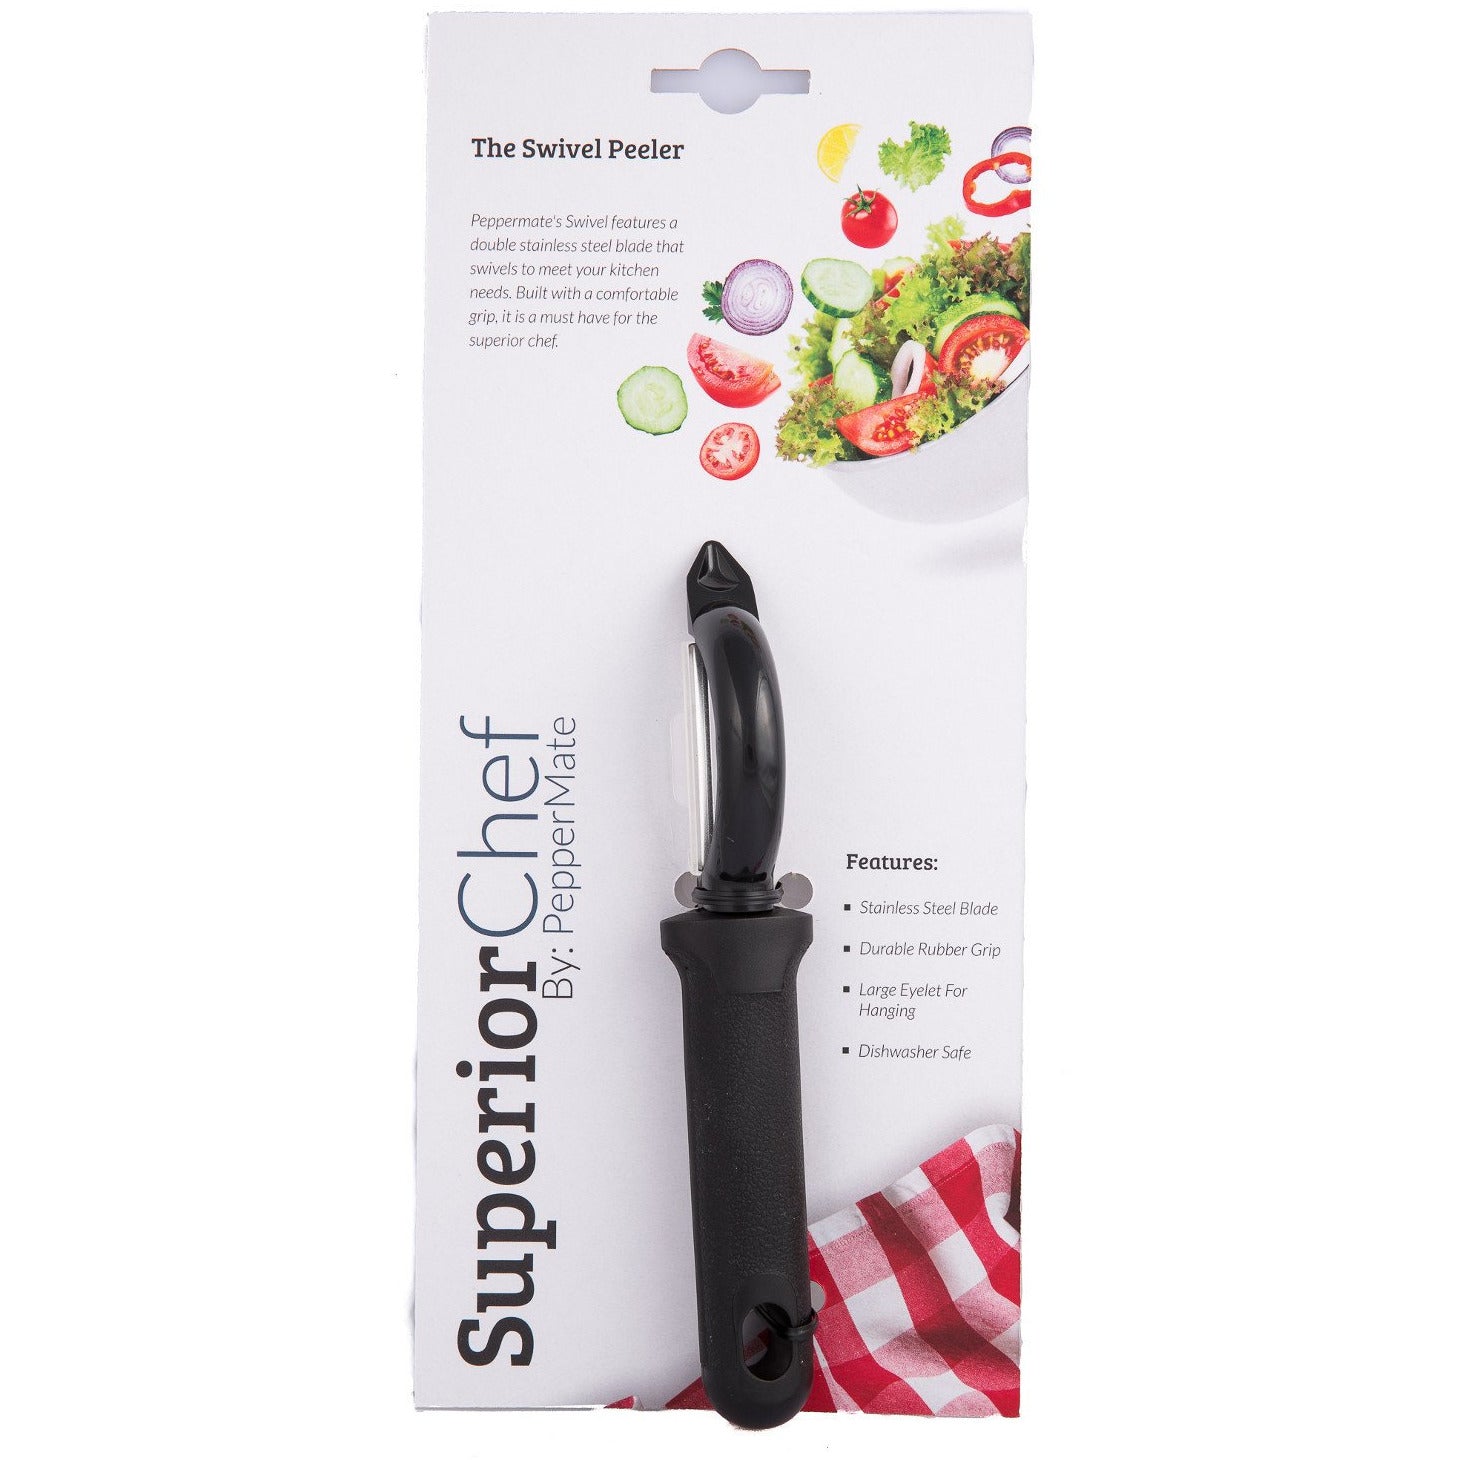 How to Use OXO Good Grips Swivel Peeler With Stainless Steel Blade